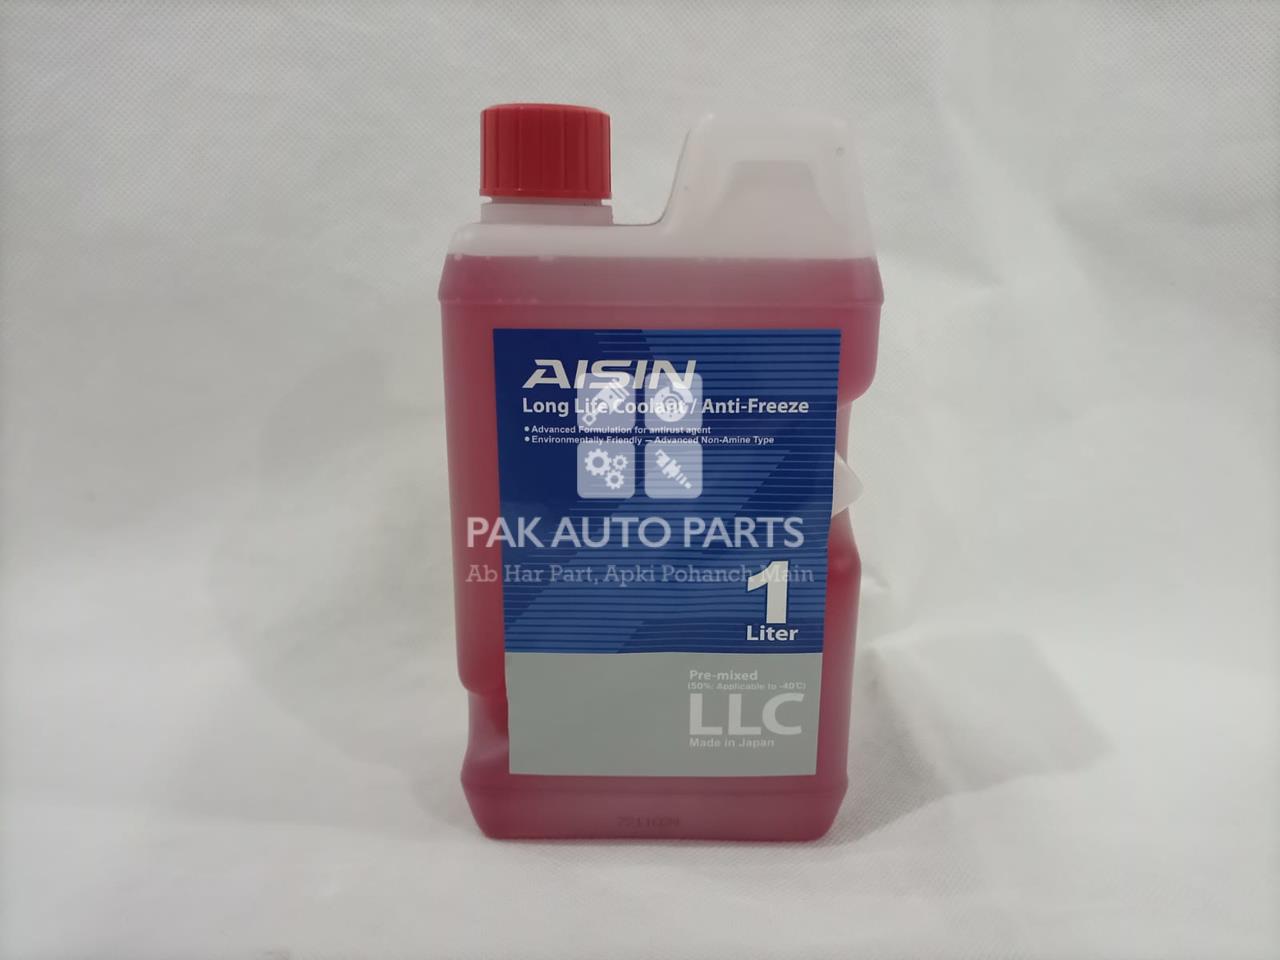 Picture of Aisin Long Life Coolant Anti-Freeze (1L)